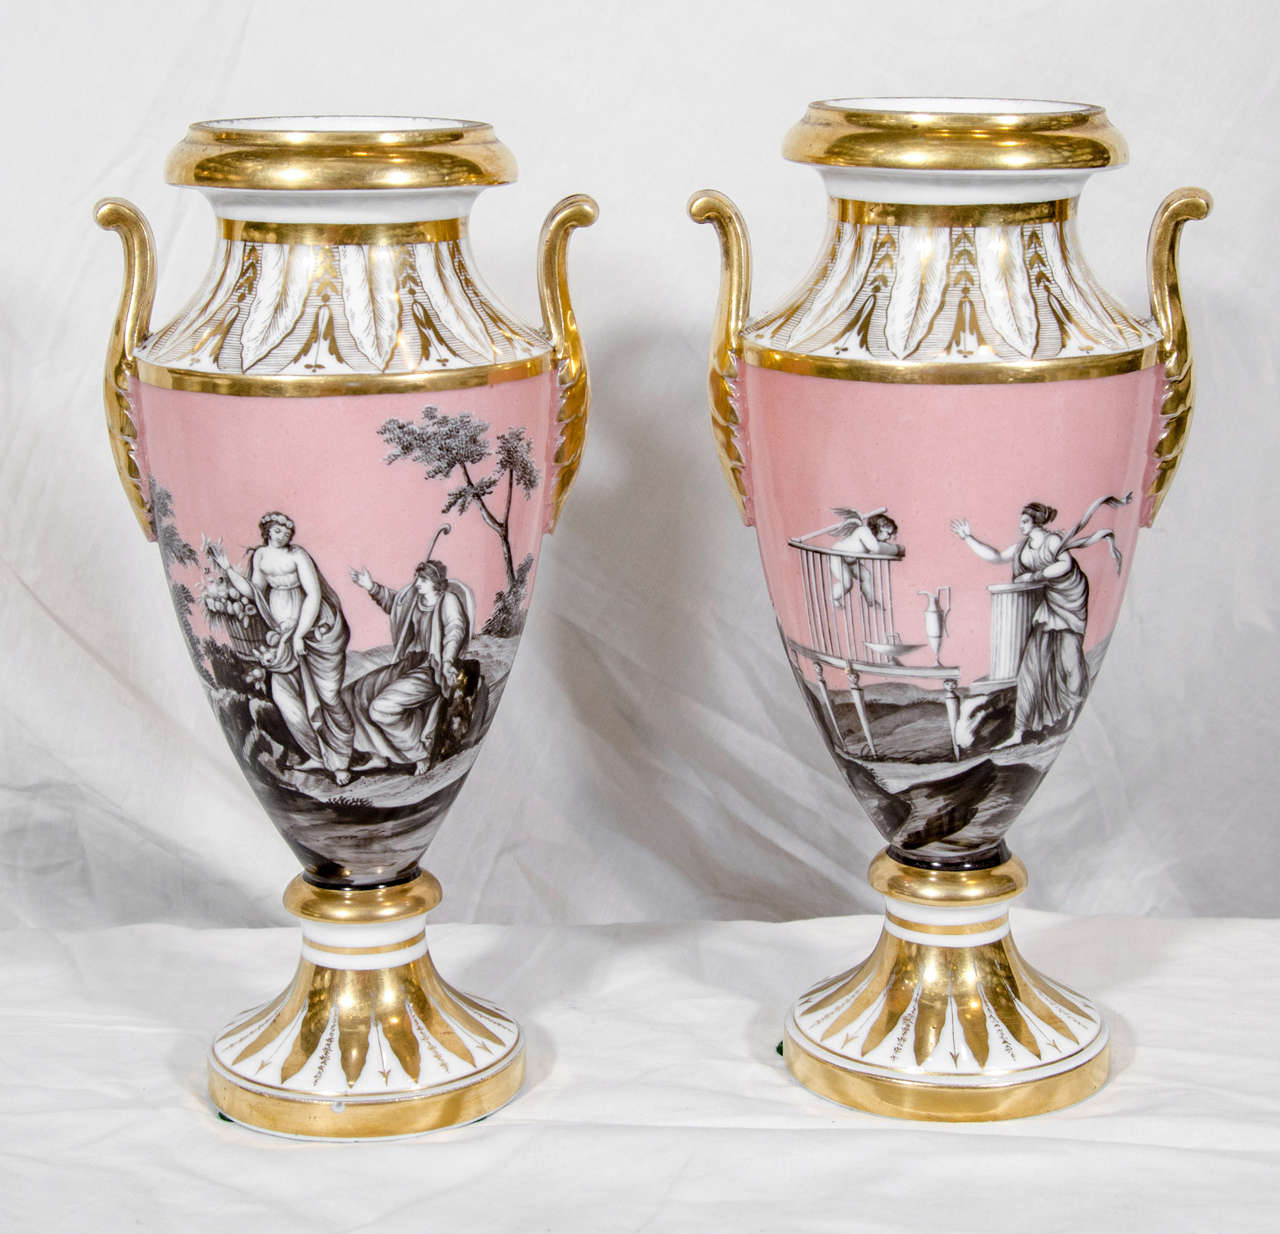 This exquisite pair of 18th century Locre vases shows romantic scenes with classical figures on a pink ground. In one scene a young woman implores Cupidt o escape from his cage and come to her. The other vase shows a romantic scene with a shepherd